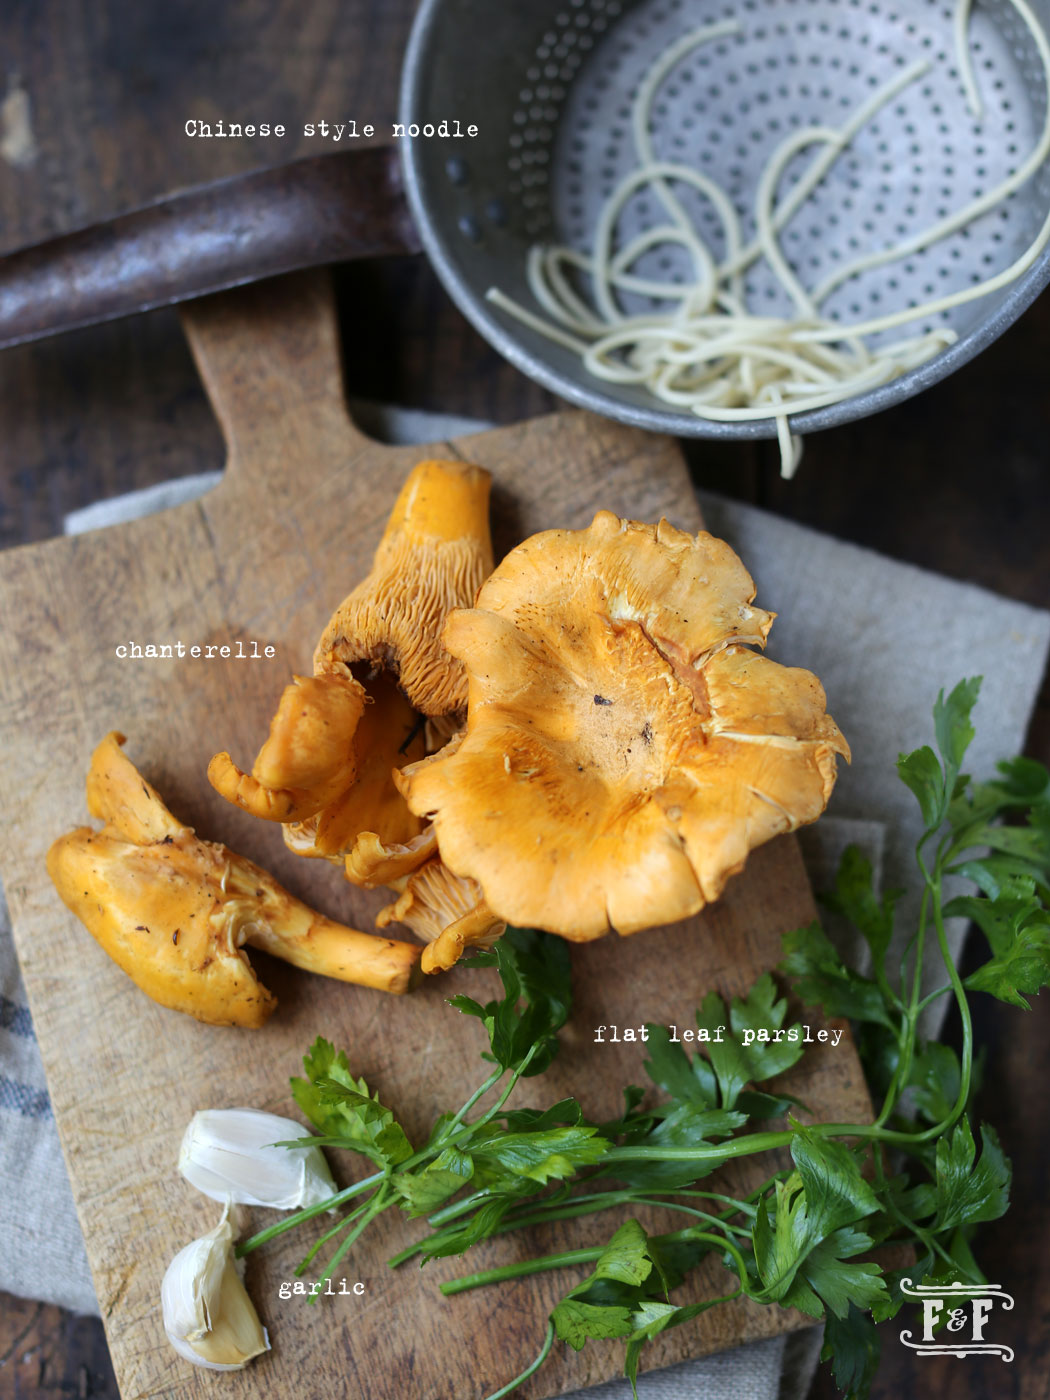 Asian Noodles with Chanterelle & Brown Butter Sauce